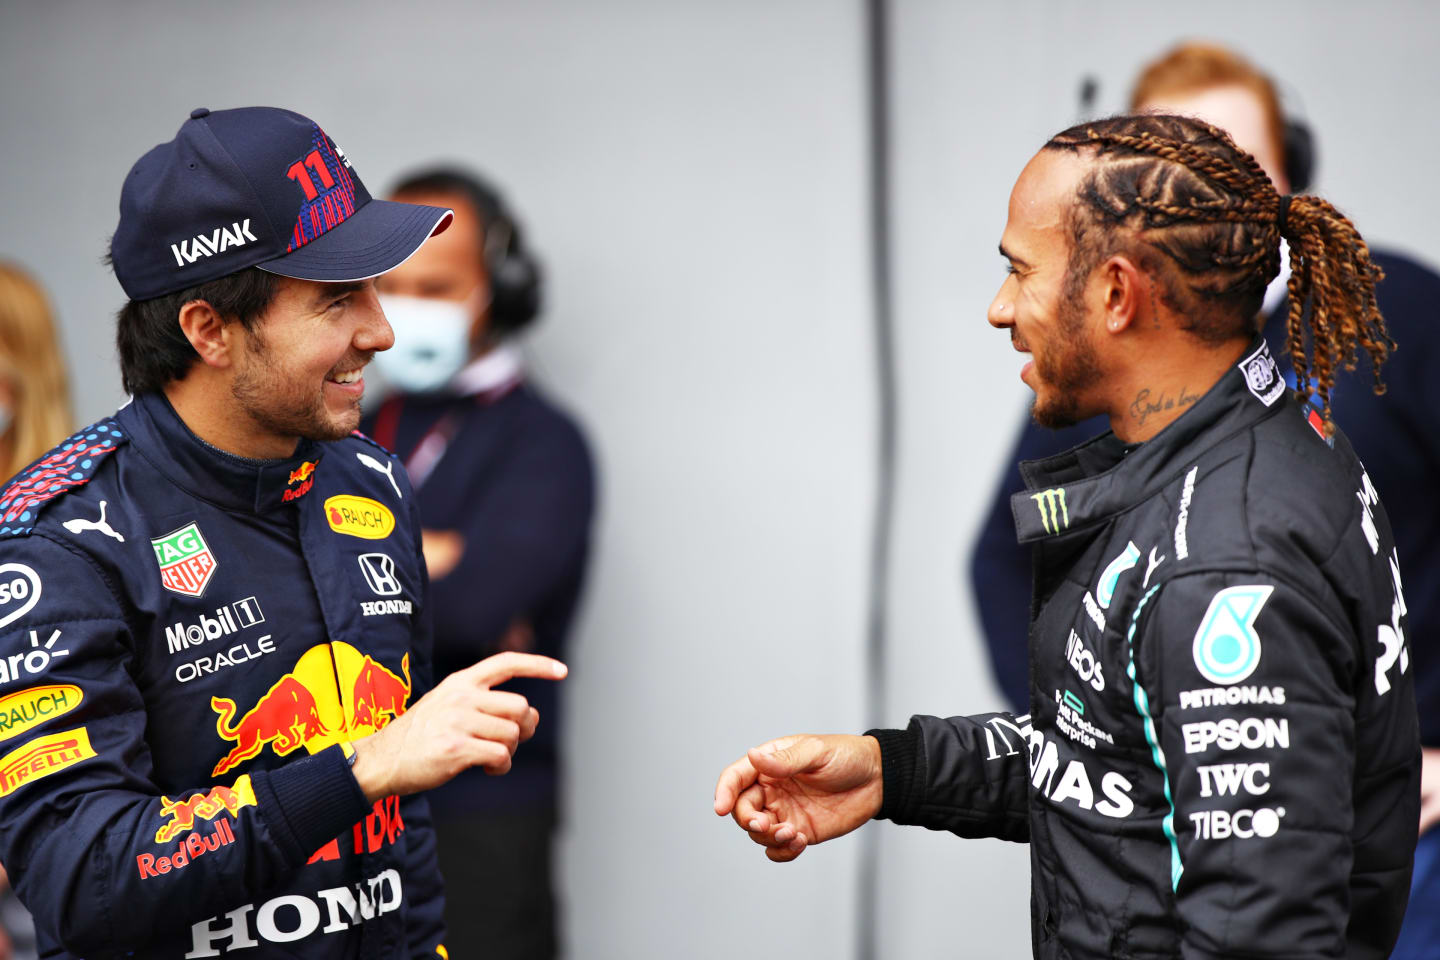 IMOLA, ITALY - APRIL 17: Second place qualifier Sergio Perez of Mexico and Red Bull Racing and pole position qualifier Lewis Hamilton of Great Britain and Mercedes GP talk in parc ferme during qualifying ahead of the F1 Grand Prix of Emilia Romagna at Autodromo Enzo e Dino Ferrari on April 17, 2021 in Imola, Italy. (Photo by Mark Thompson/Getty Images)